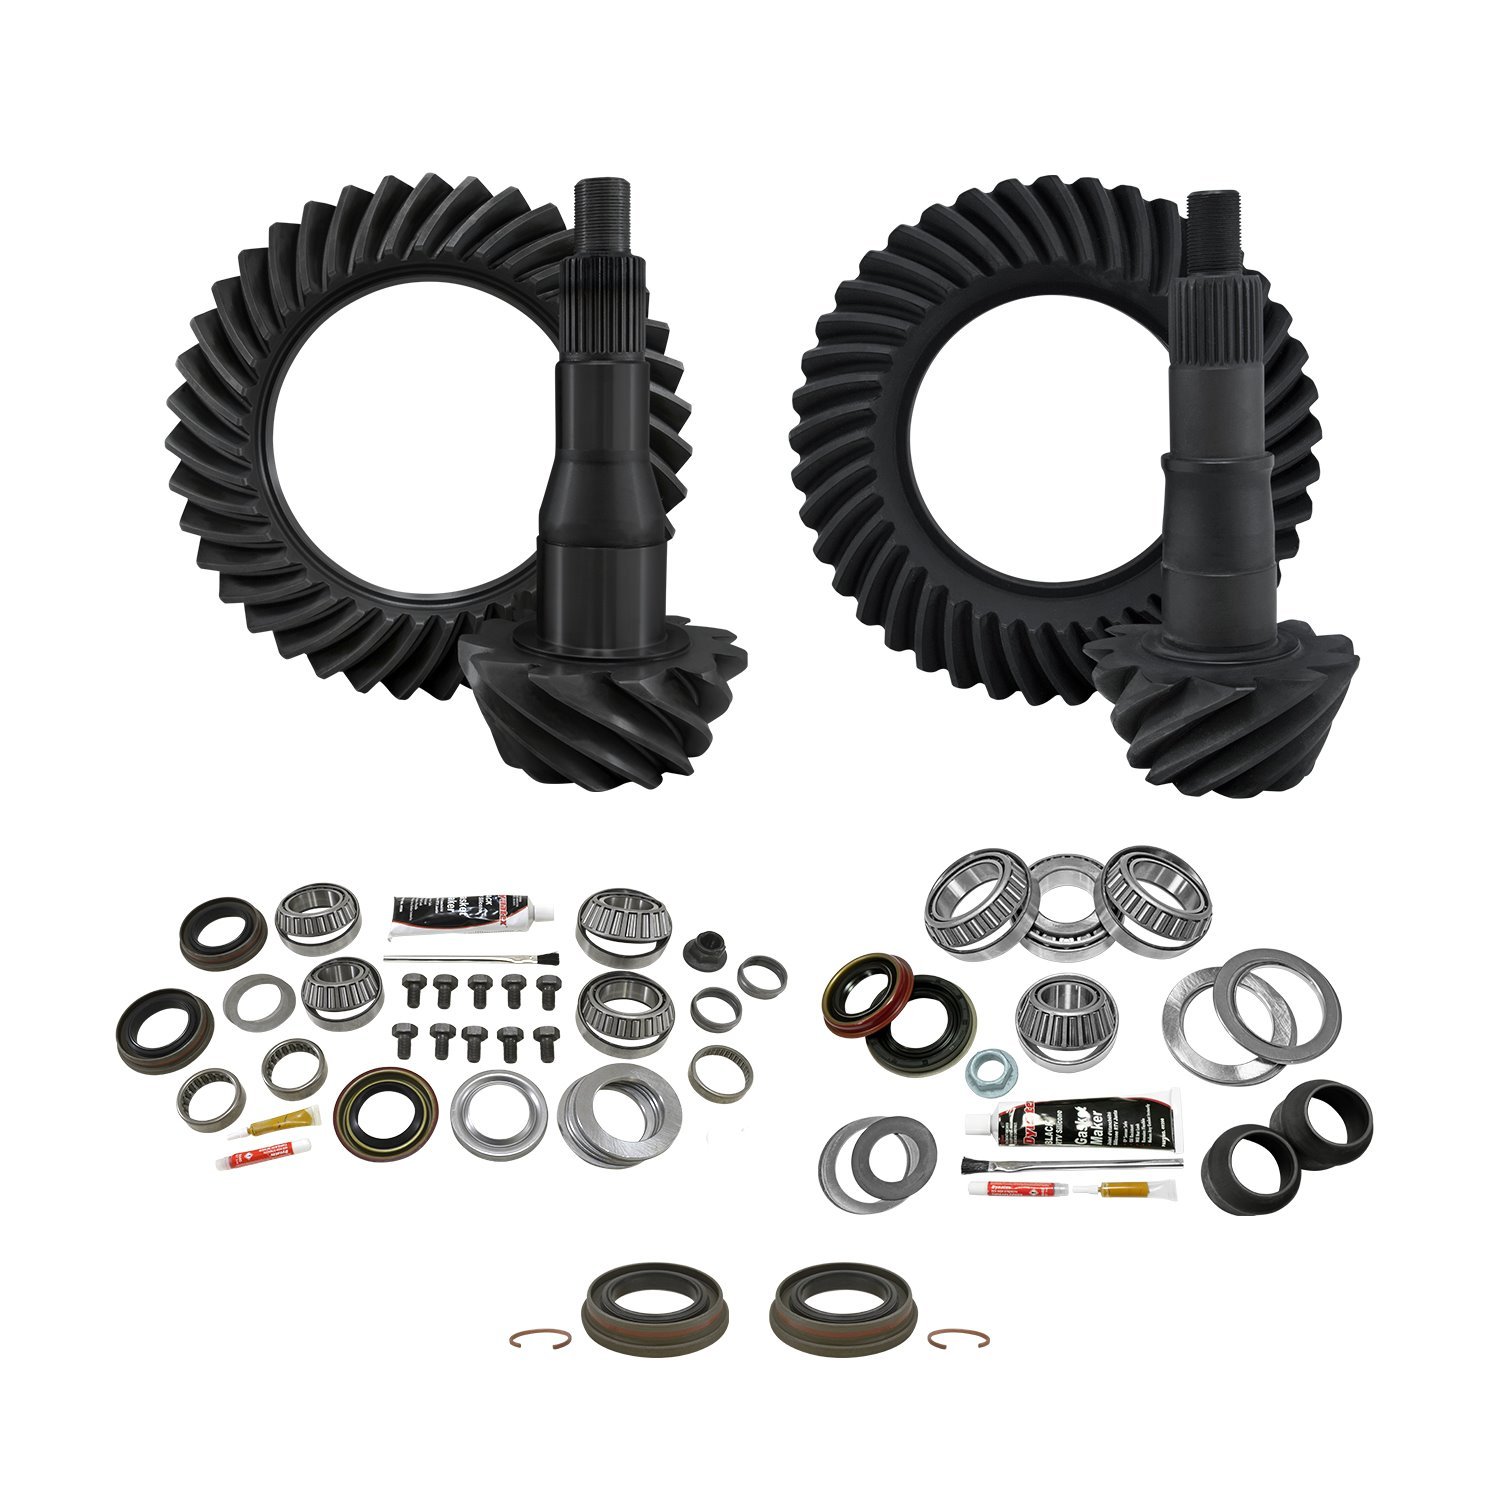 Re-Gear & Installation Kit, Ford 9.75 in., 2000-2010 F150, 4.88 Ratio, Fr&Rr